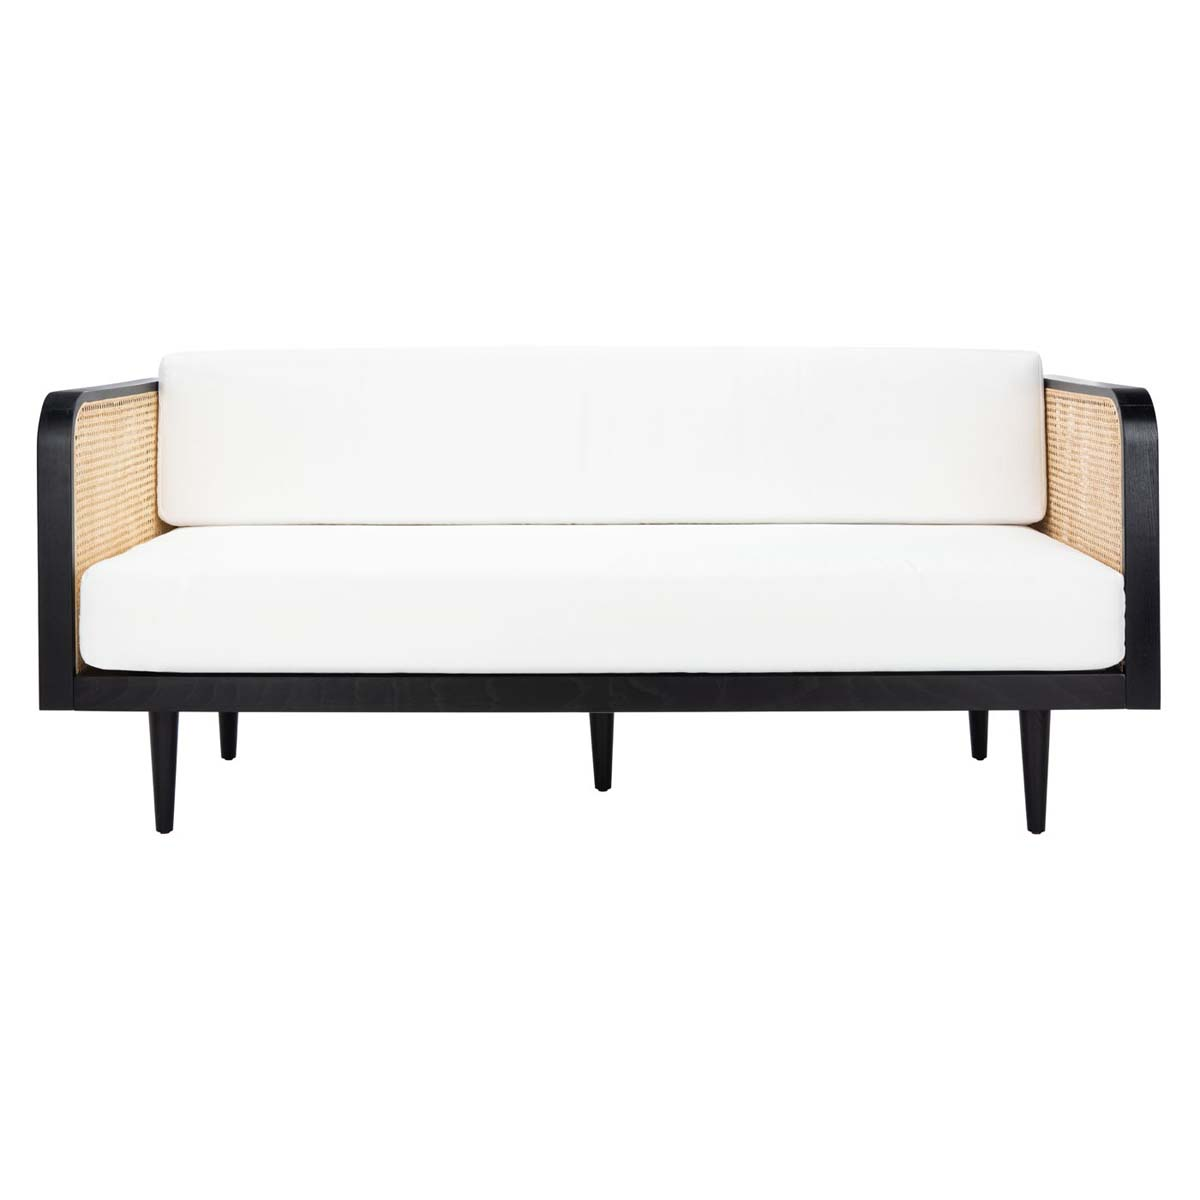 Safavieh Couture Helena French Cane Daybed